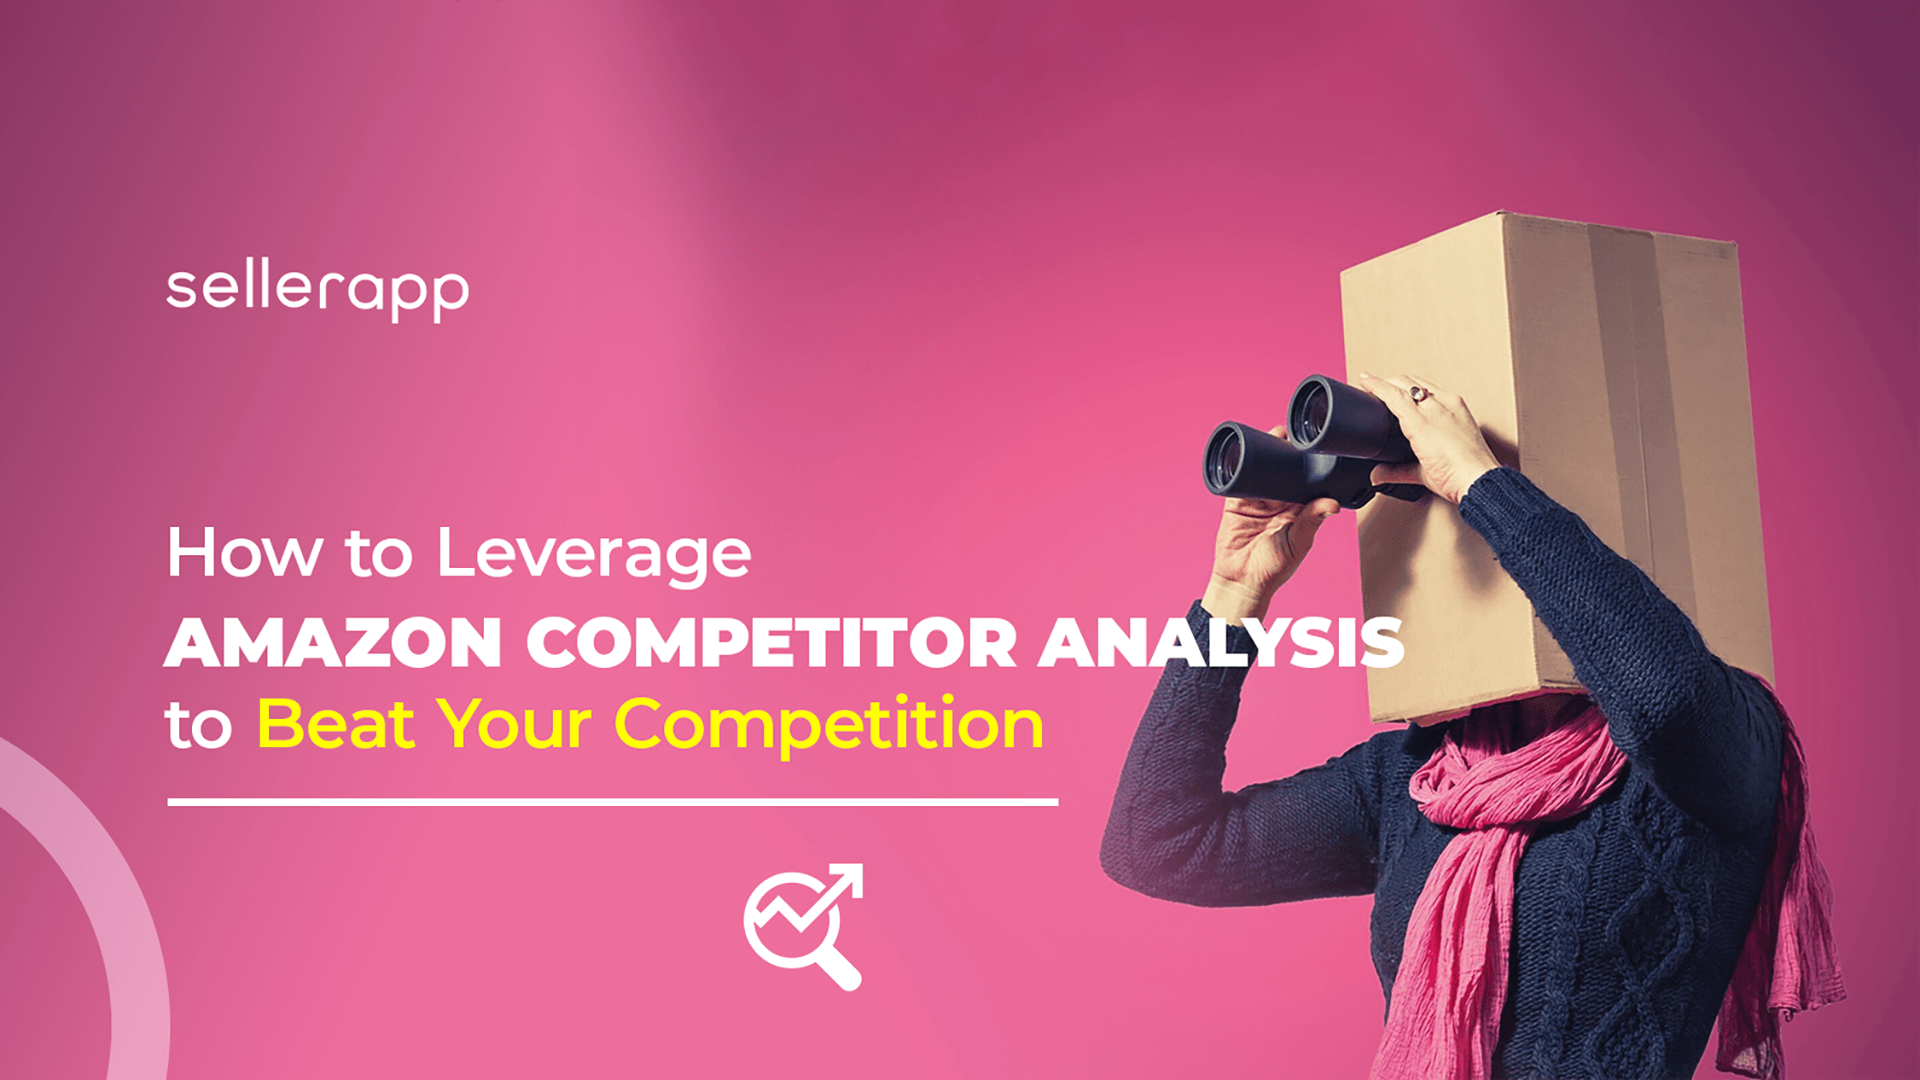 How to Leverage Amazon Competitor Analysis to Beat Your Competition